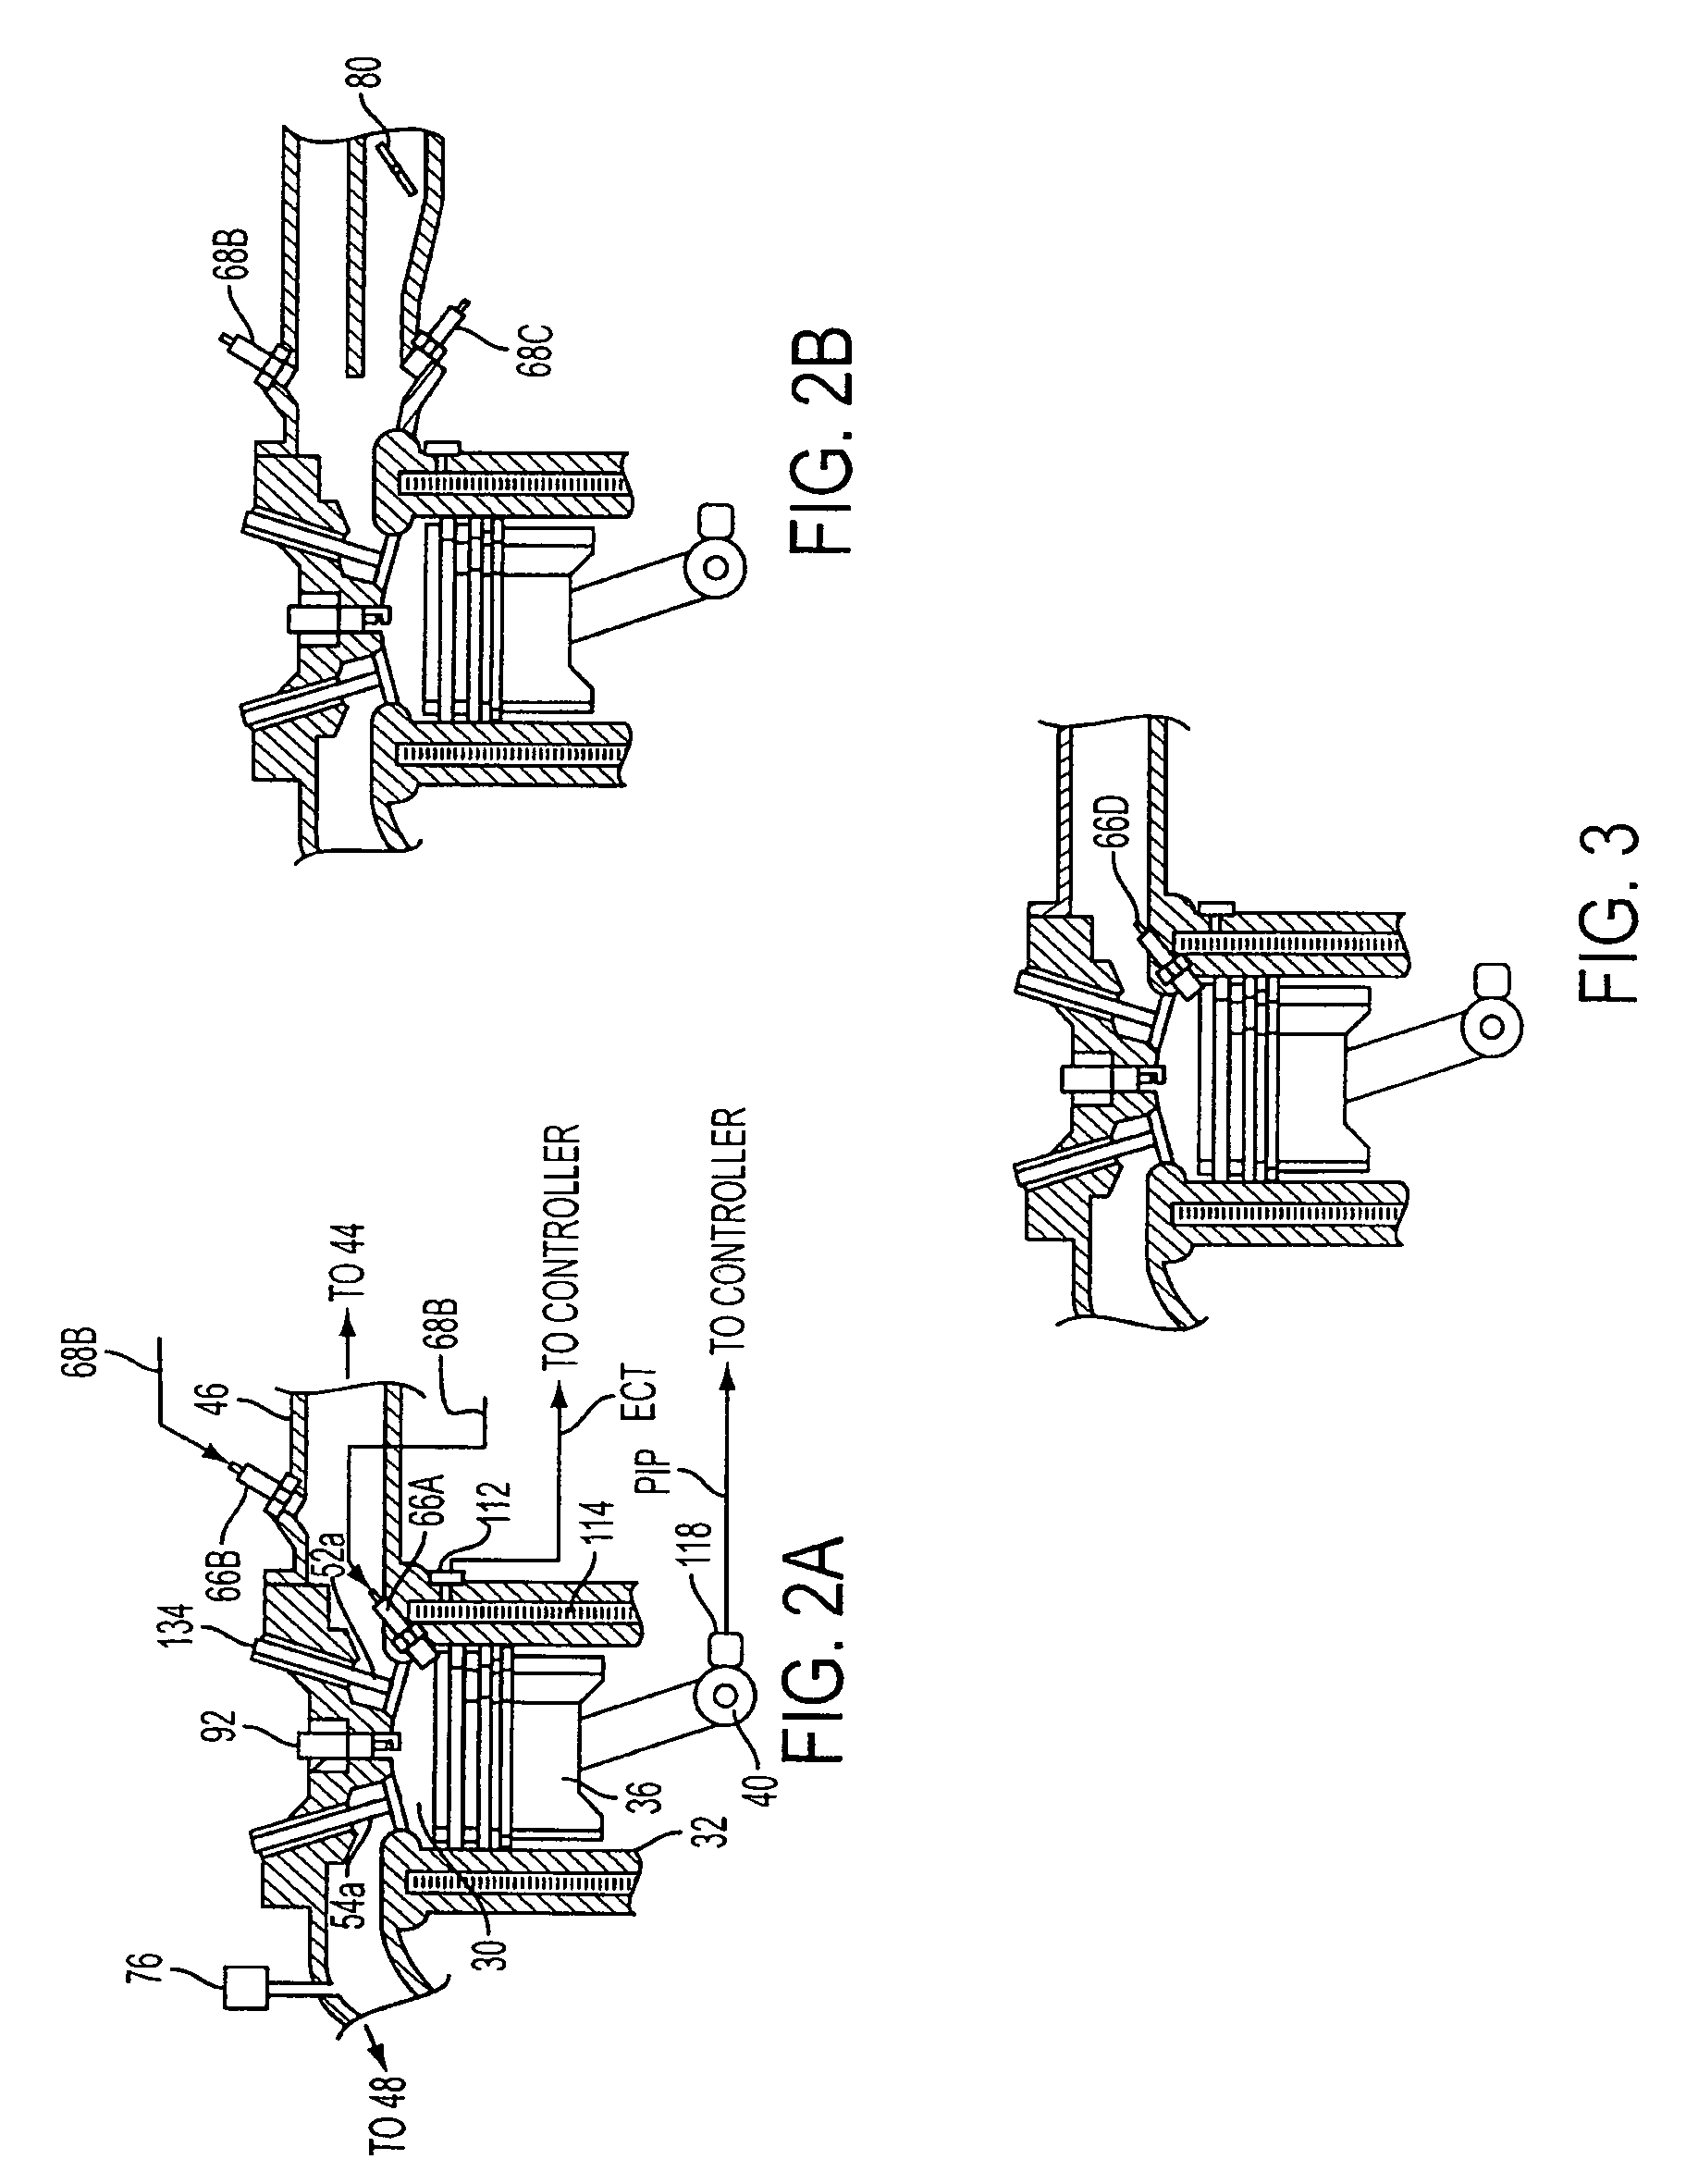 Flex-fuel variable displacement engine control system and method